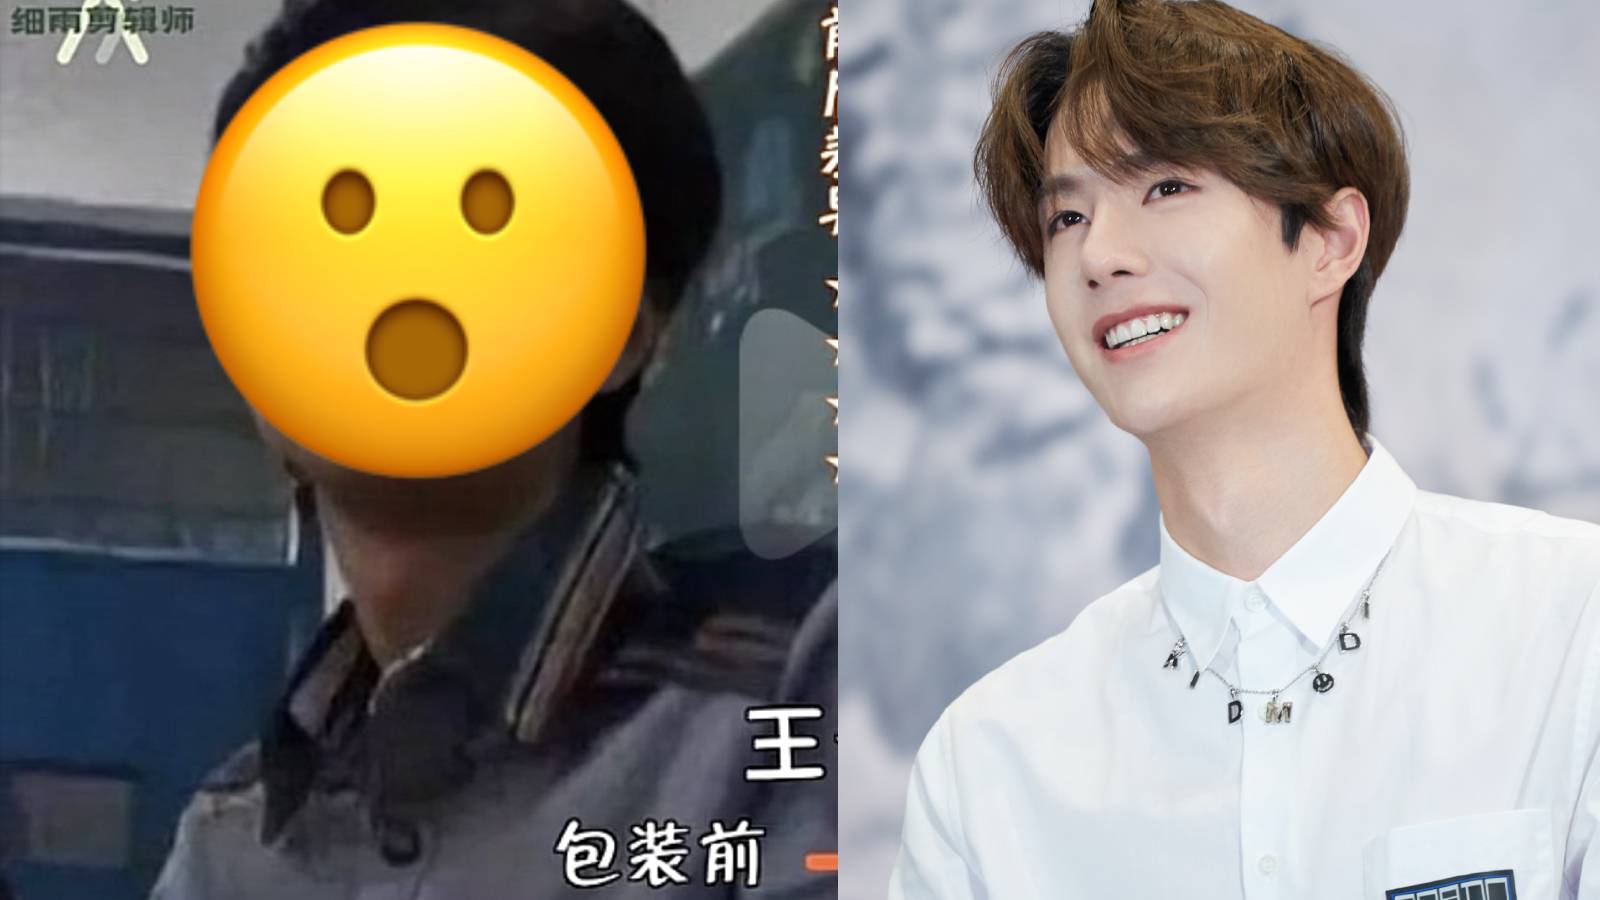 Old Pic Of Wang Yibo Shows How Different He Looks Now; Netizens Say It’s The “Power Of Styling”